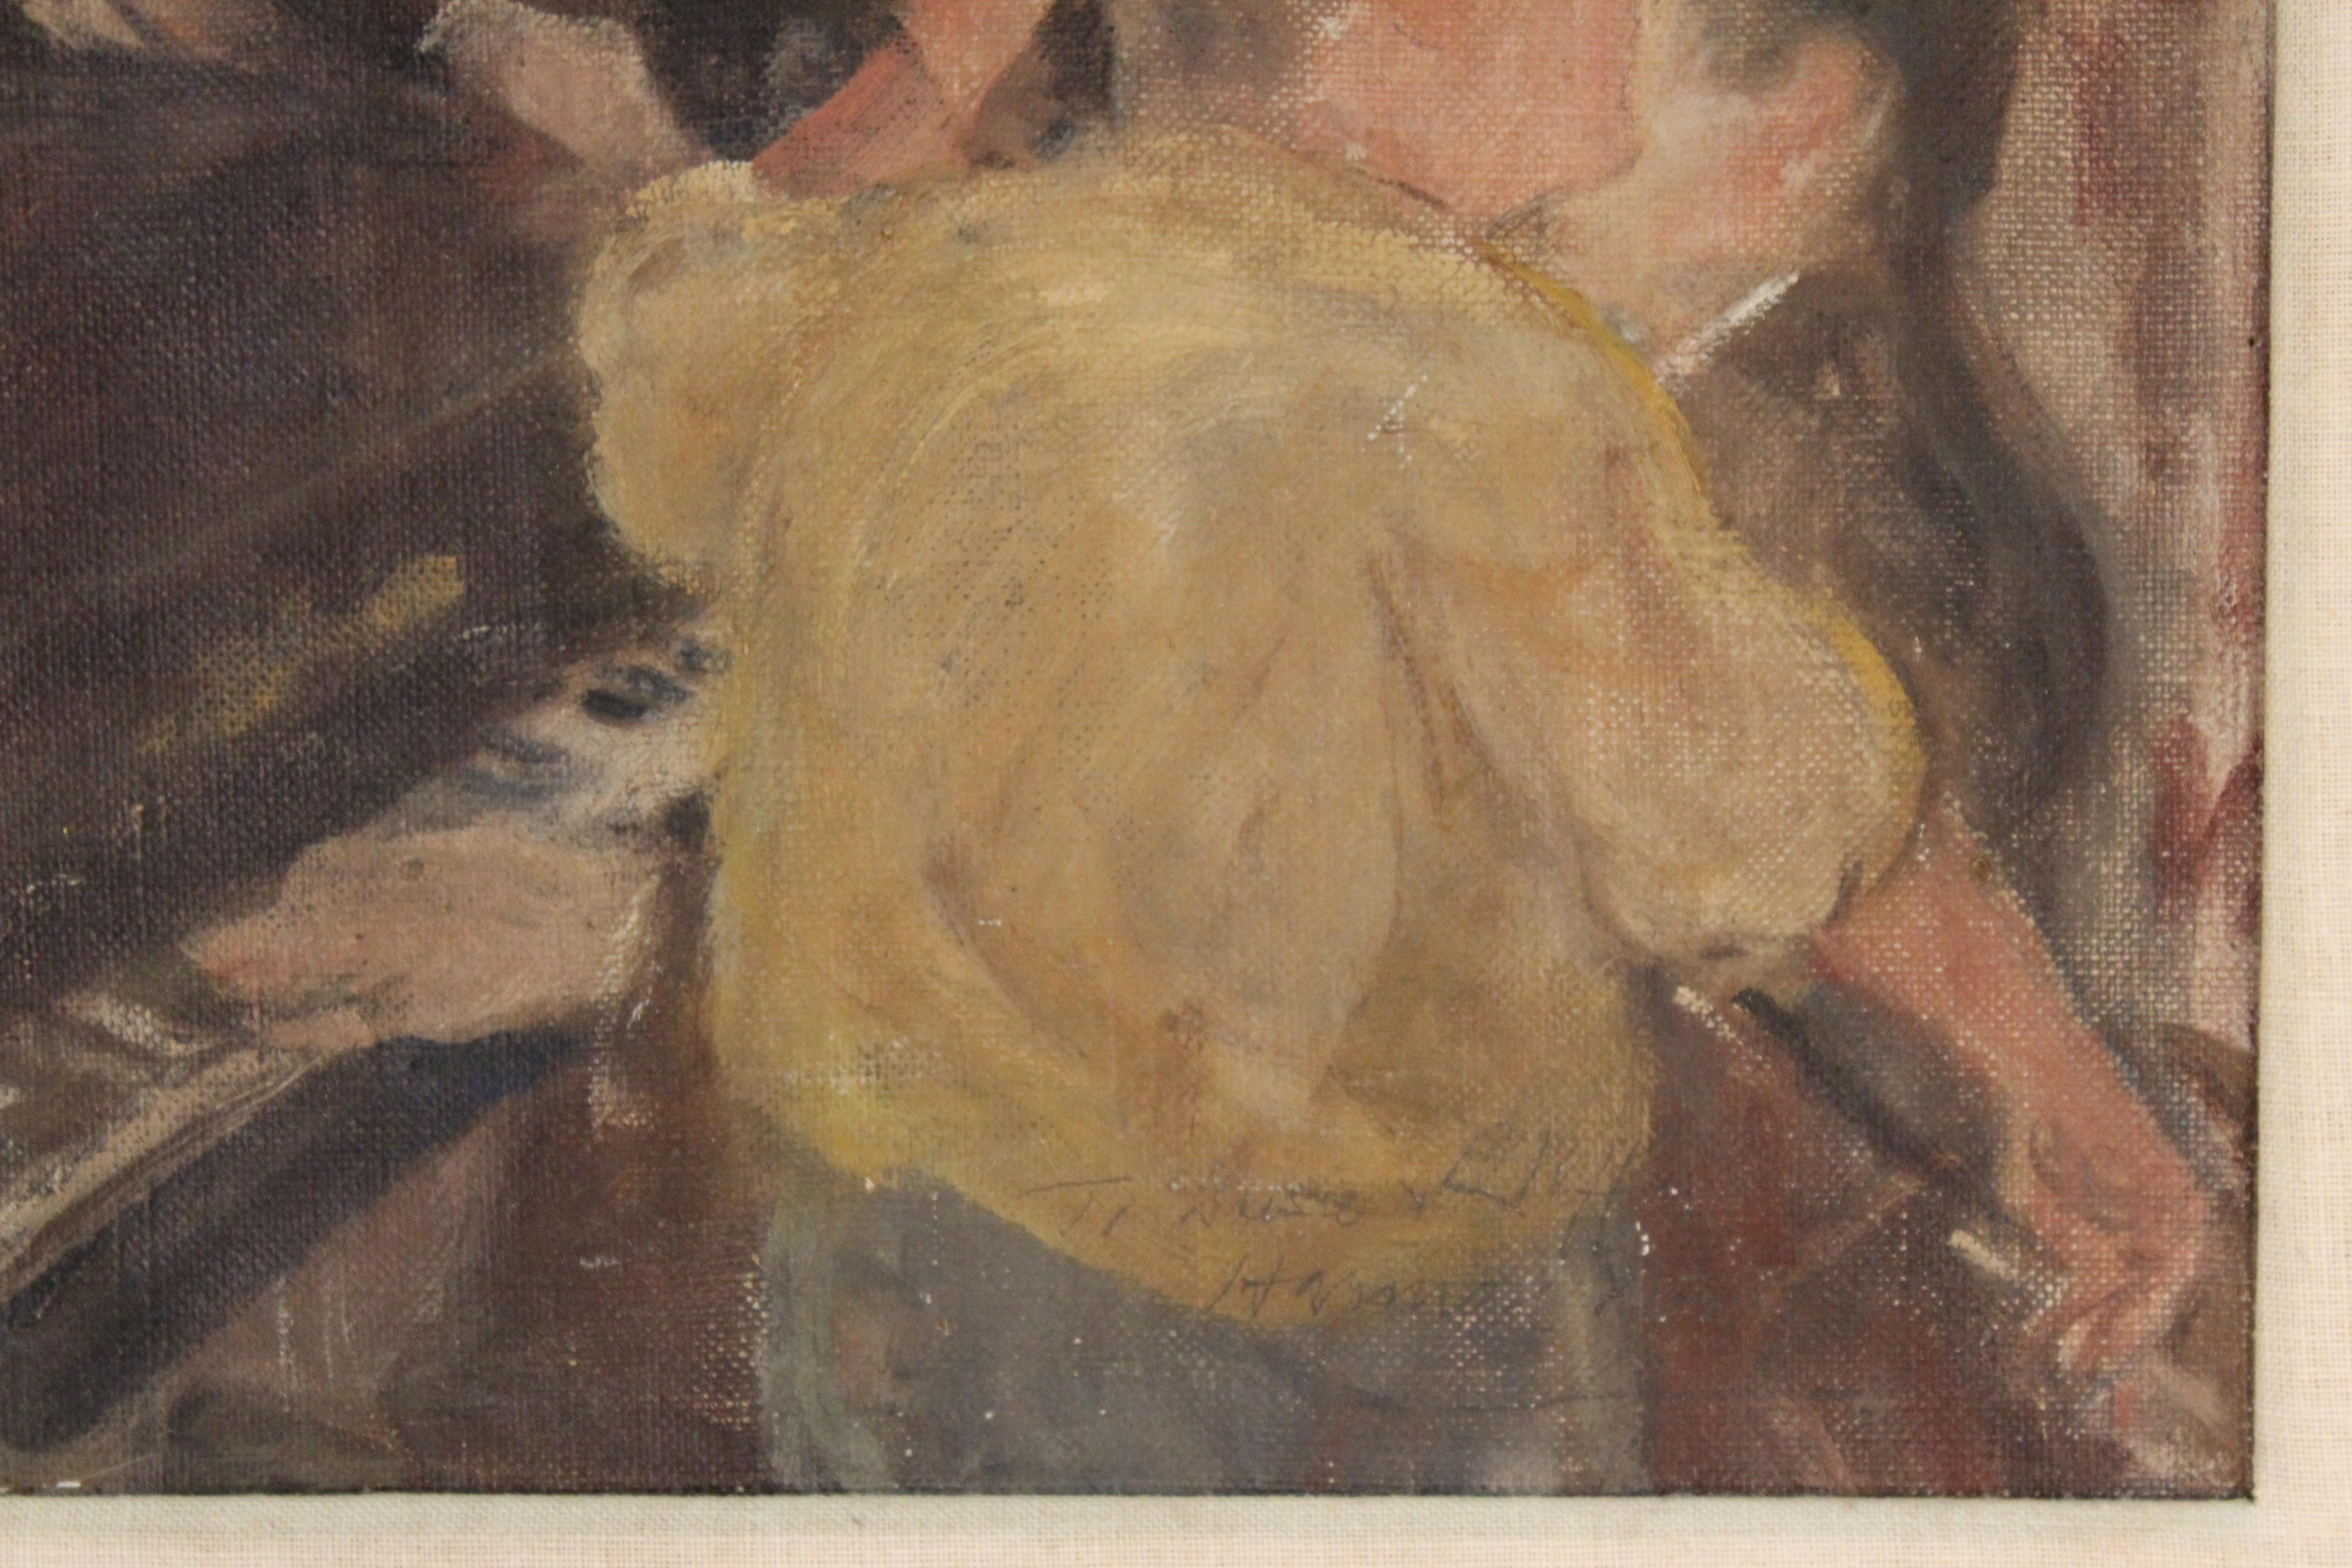 Painted Modern Genre Oil on Canvas Painting of a Jazz Singer with Pianist